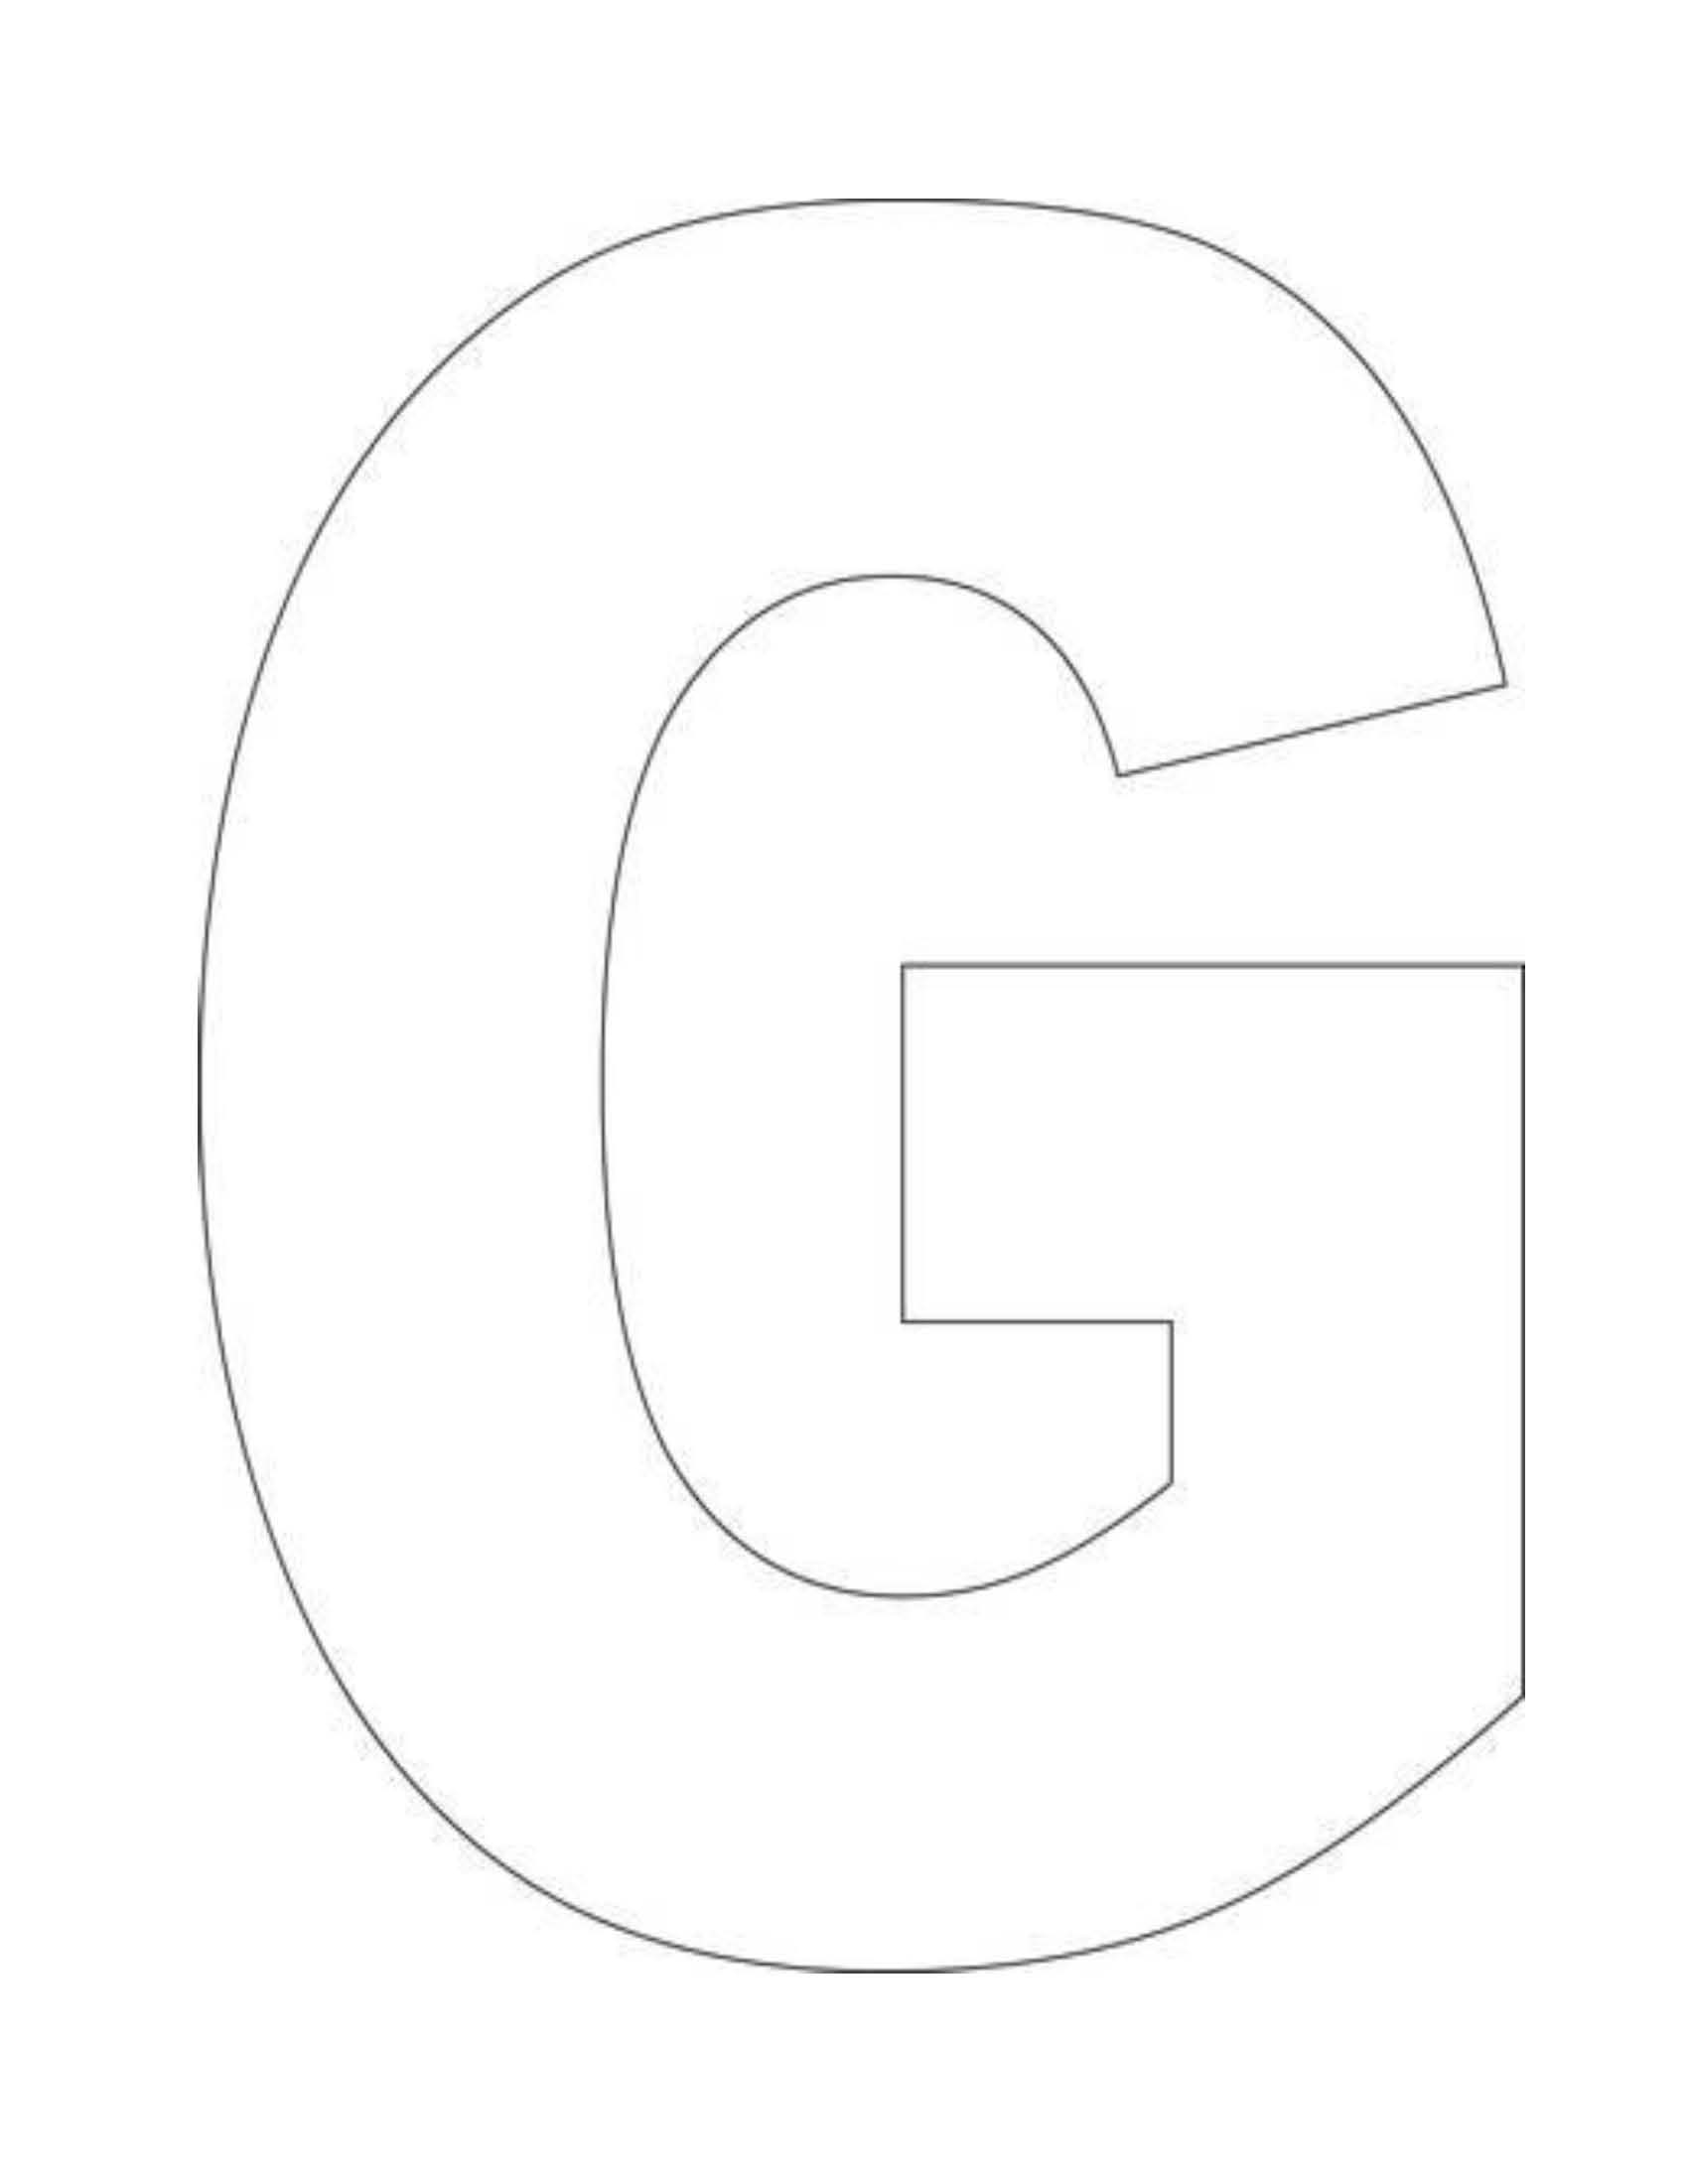 Alphabet Letter G drawing free image download